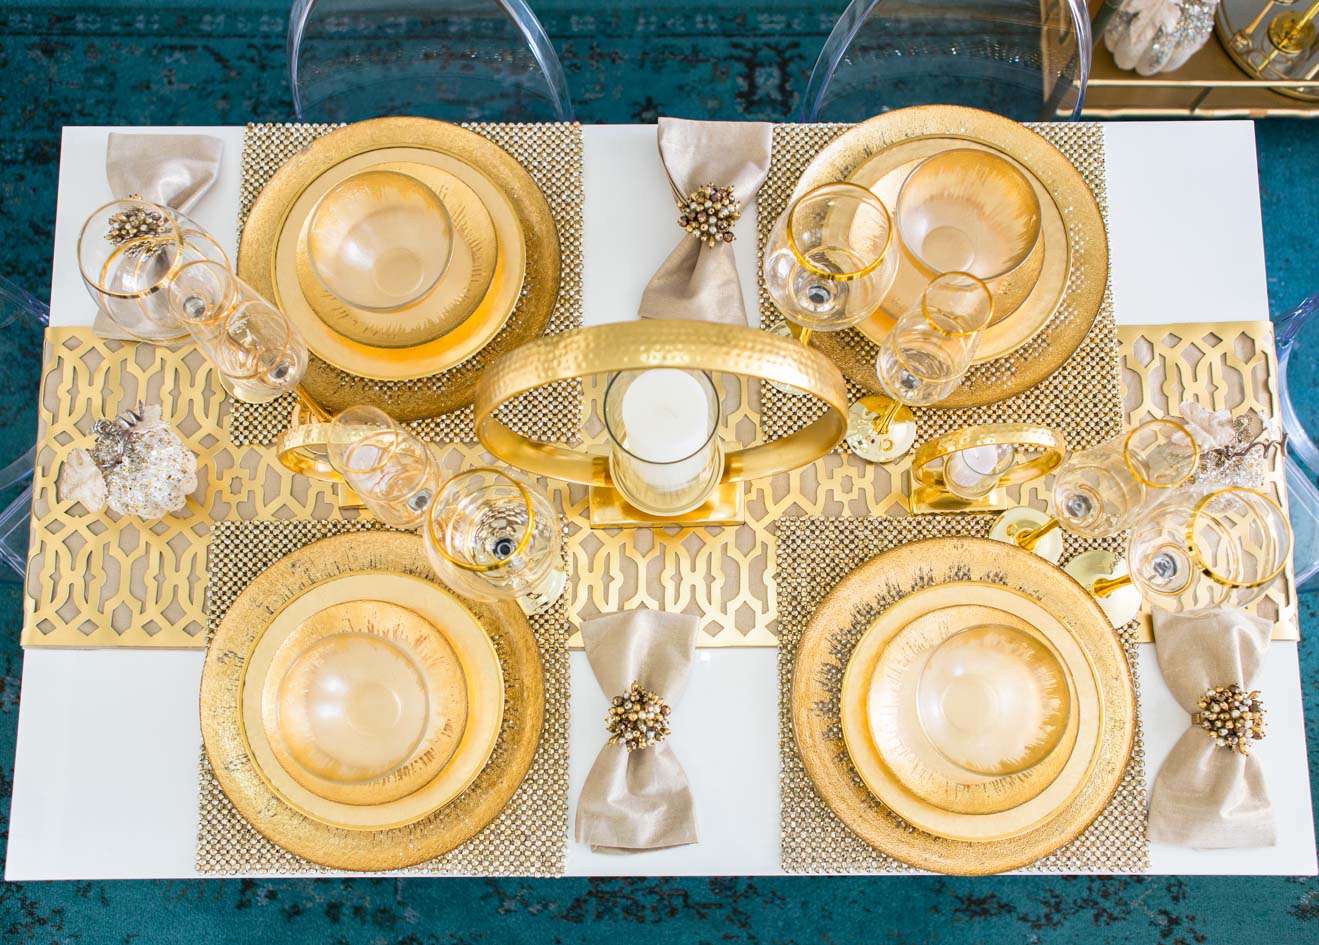 Z Gallerie Thanksgiving Tablescape + Giveaway, Laura Lily- Fashion, Travel and Lifestyle Blog, Fall Table Decor Ideas, Thanksgiving Decorating Ideas, - Z Gallerie Thanksgiving Tablescape by popular Los Angeles style blogger Laura Lily